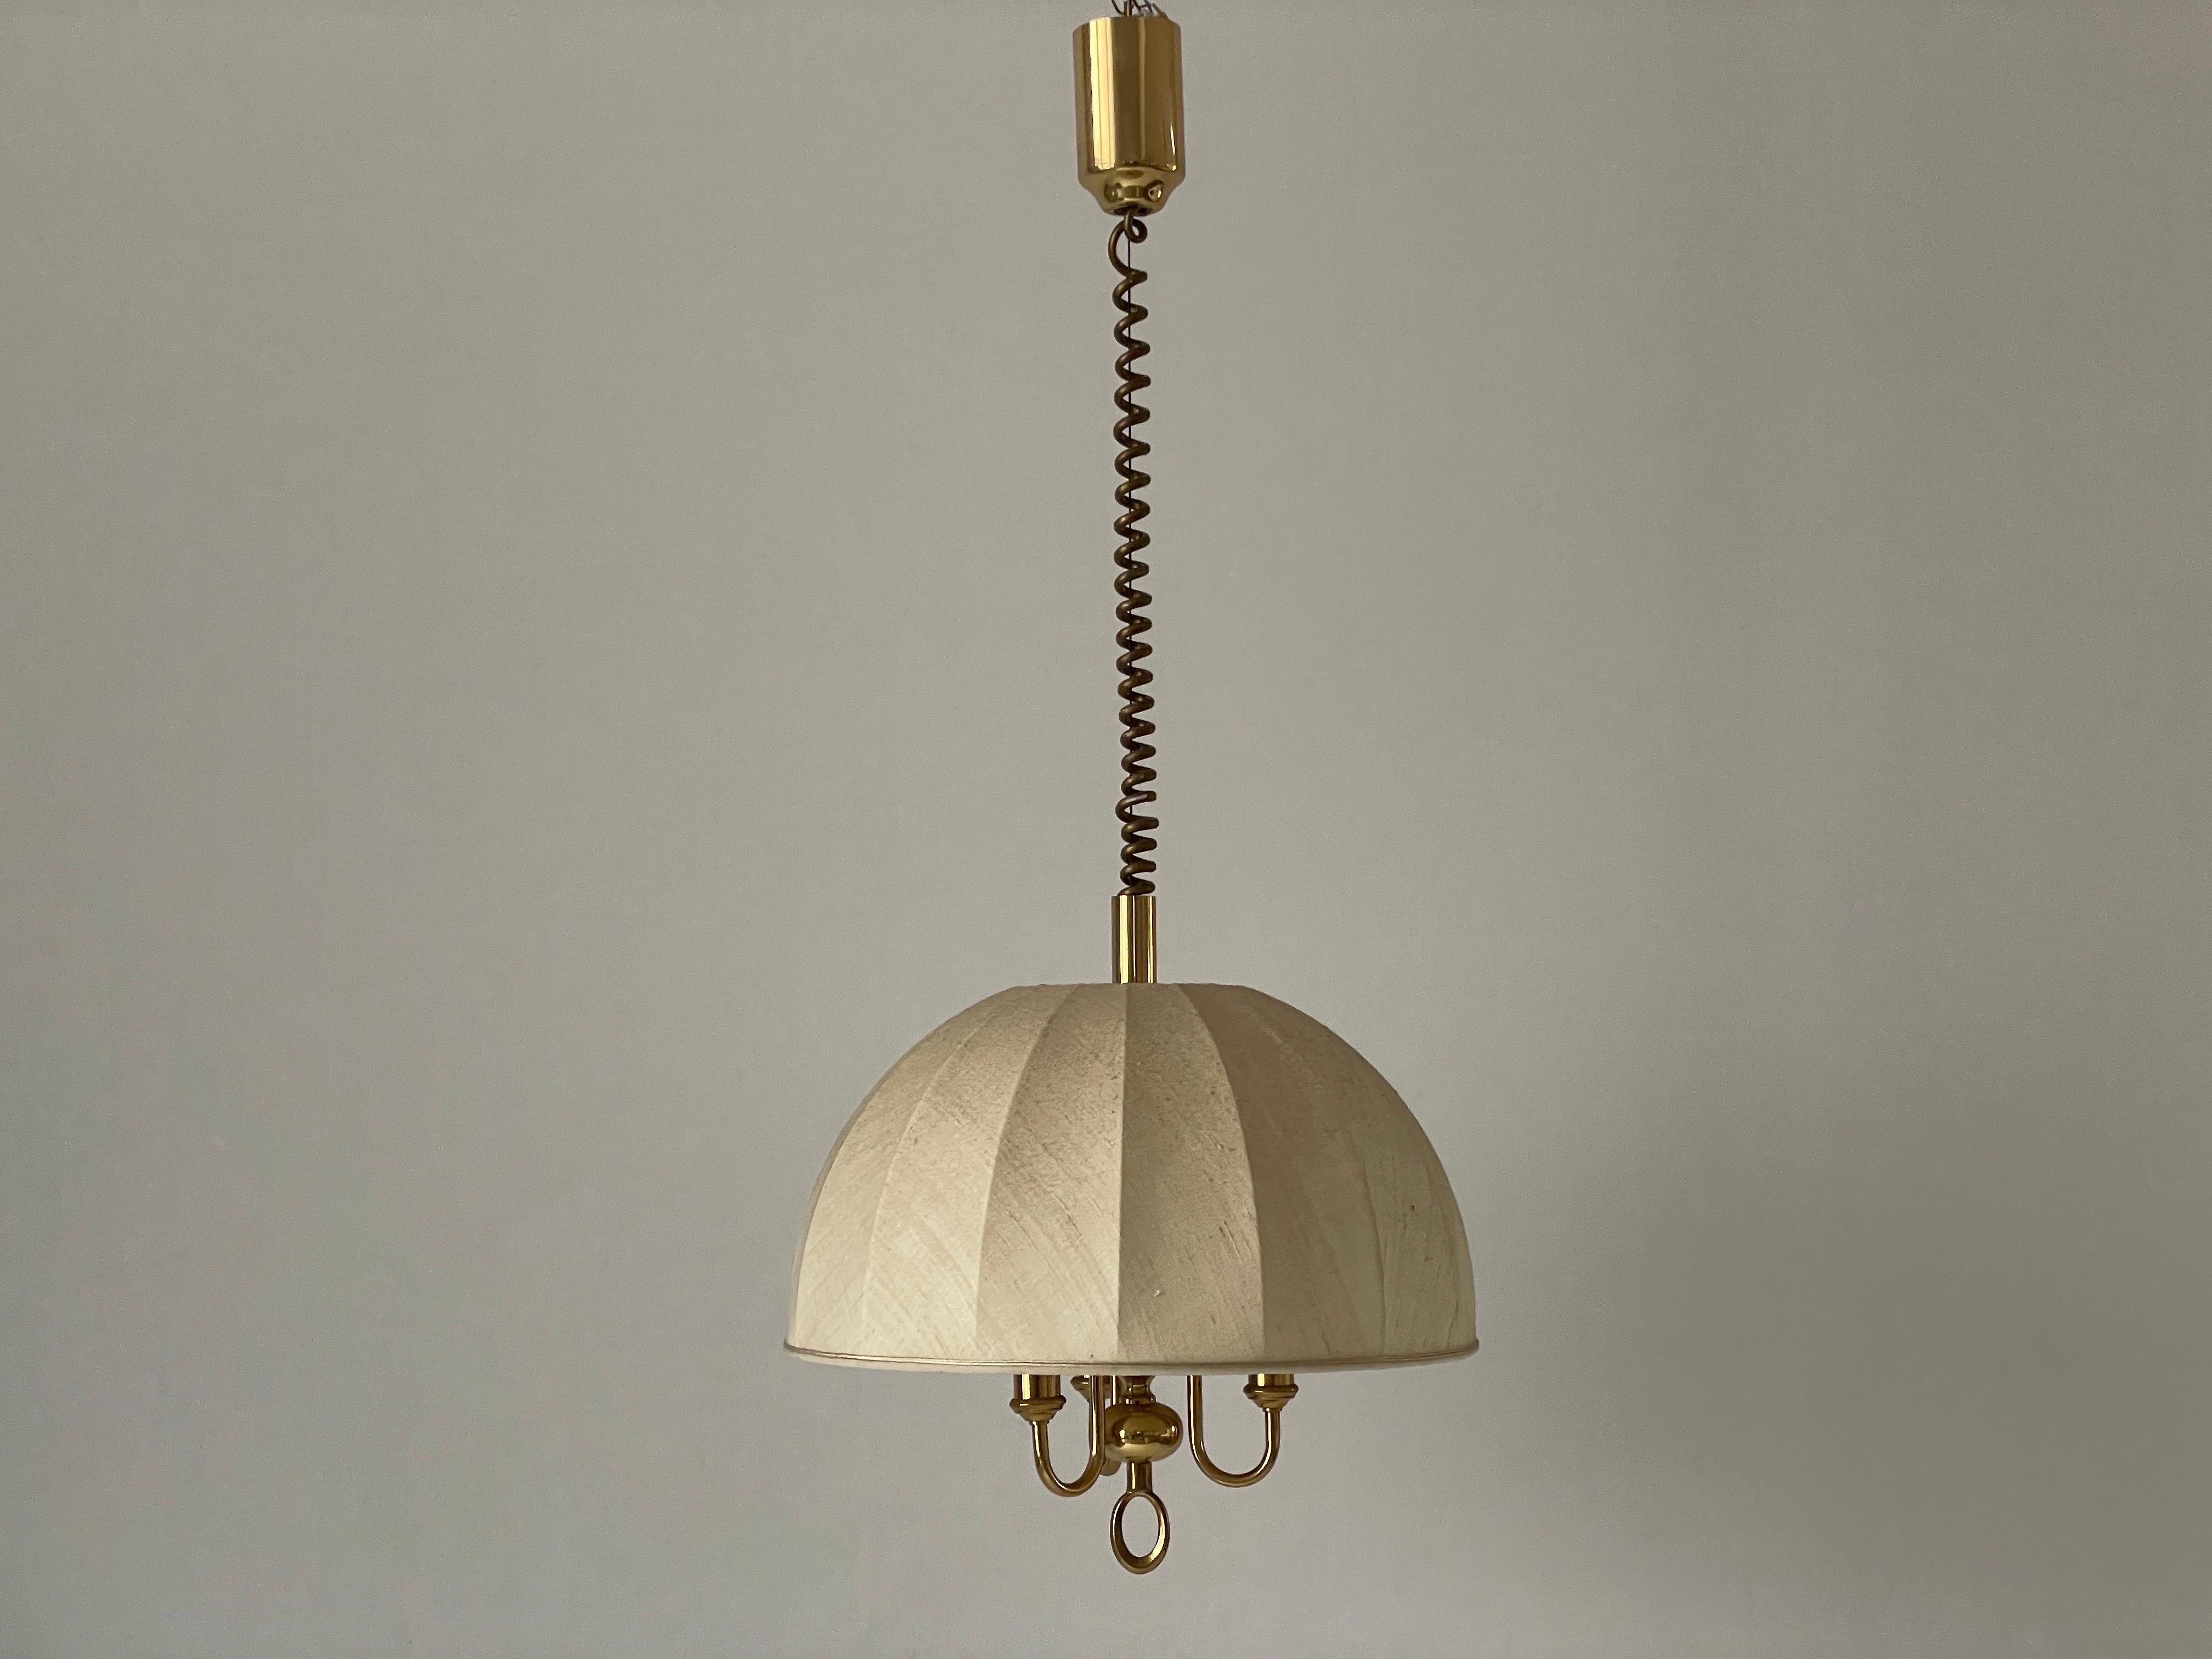 Beige Fabric and Brass 3 socket Adjustable Shade Mid-century Modern XL Pendant Lamp by WKR, 1970s, Germany

Adjustable large lampshade.

Brass body & fabric shade
Manufactured in Germany

This lamp works with 3 x E14 light bulbs.

Measures: 
Height